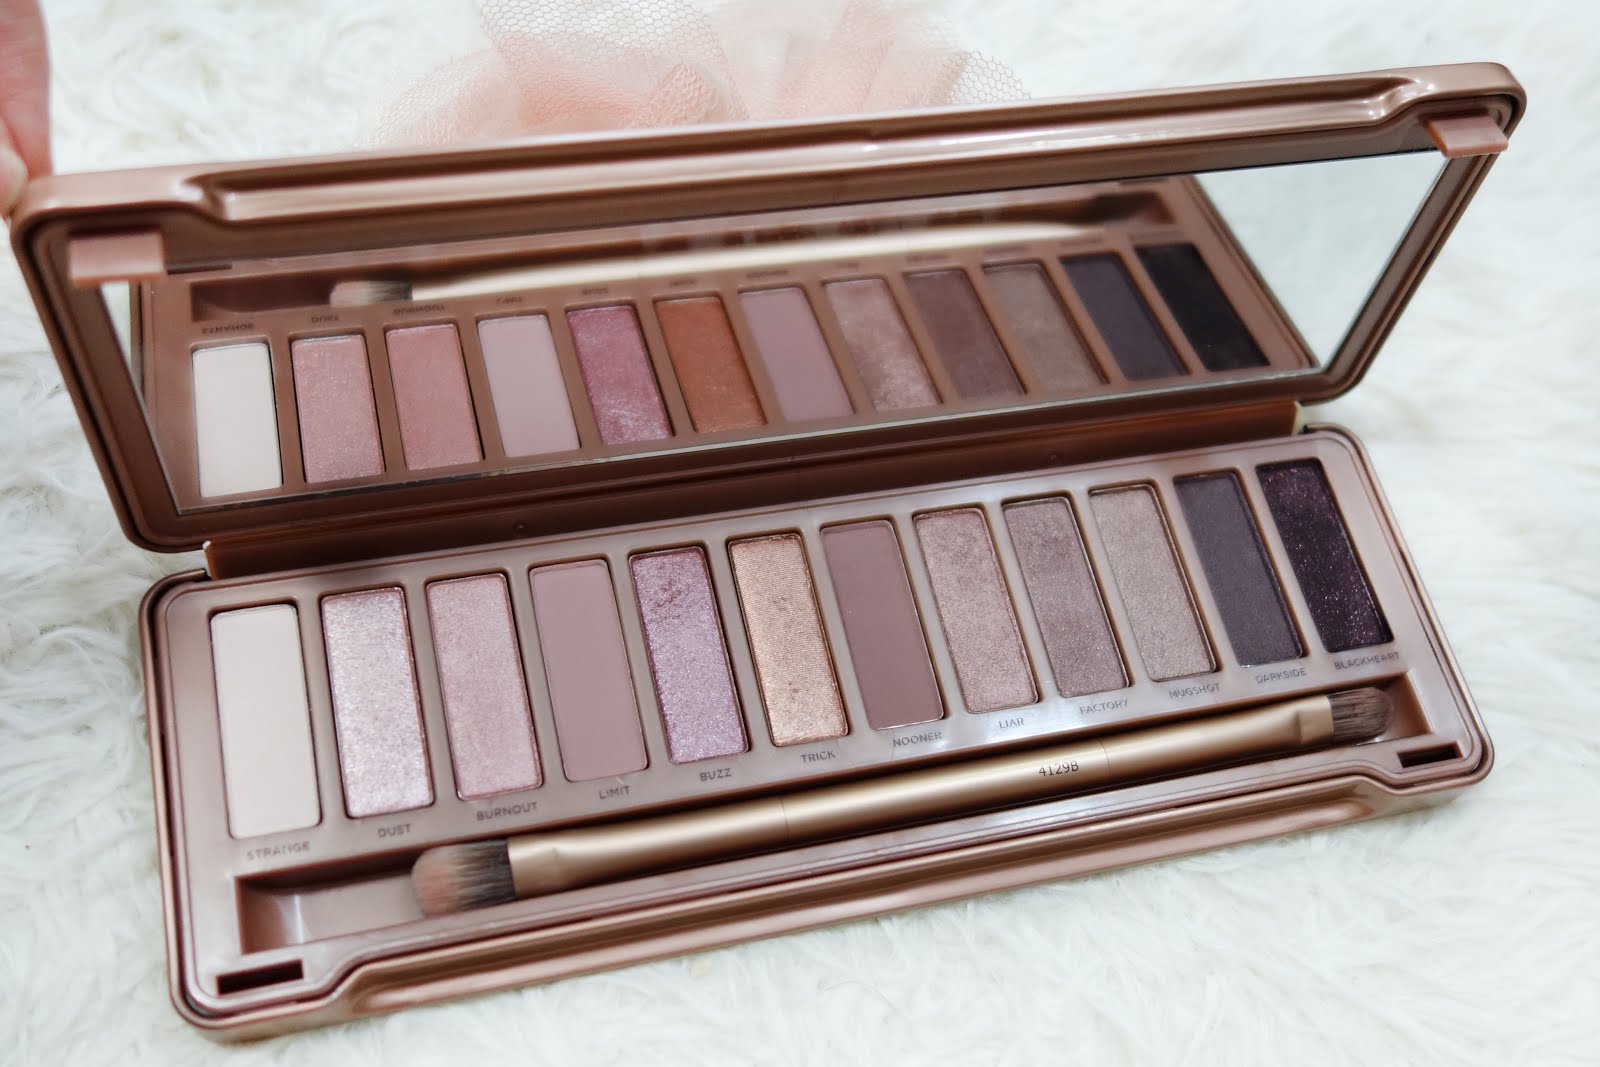 Urban Decay Naked 3 Palette.